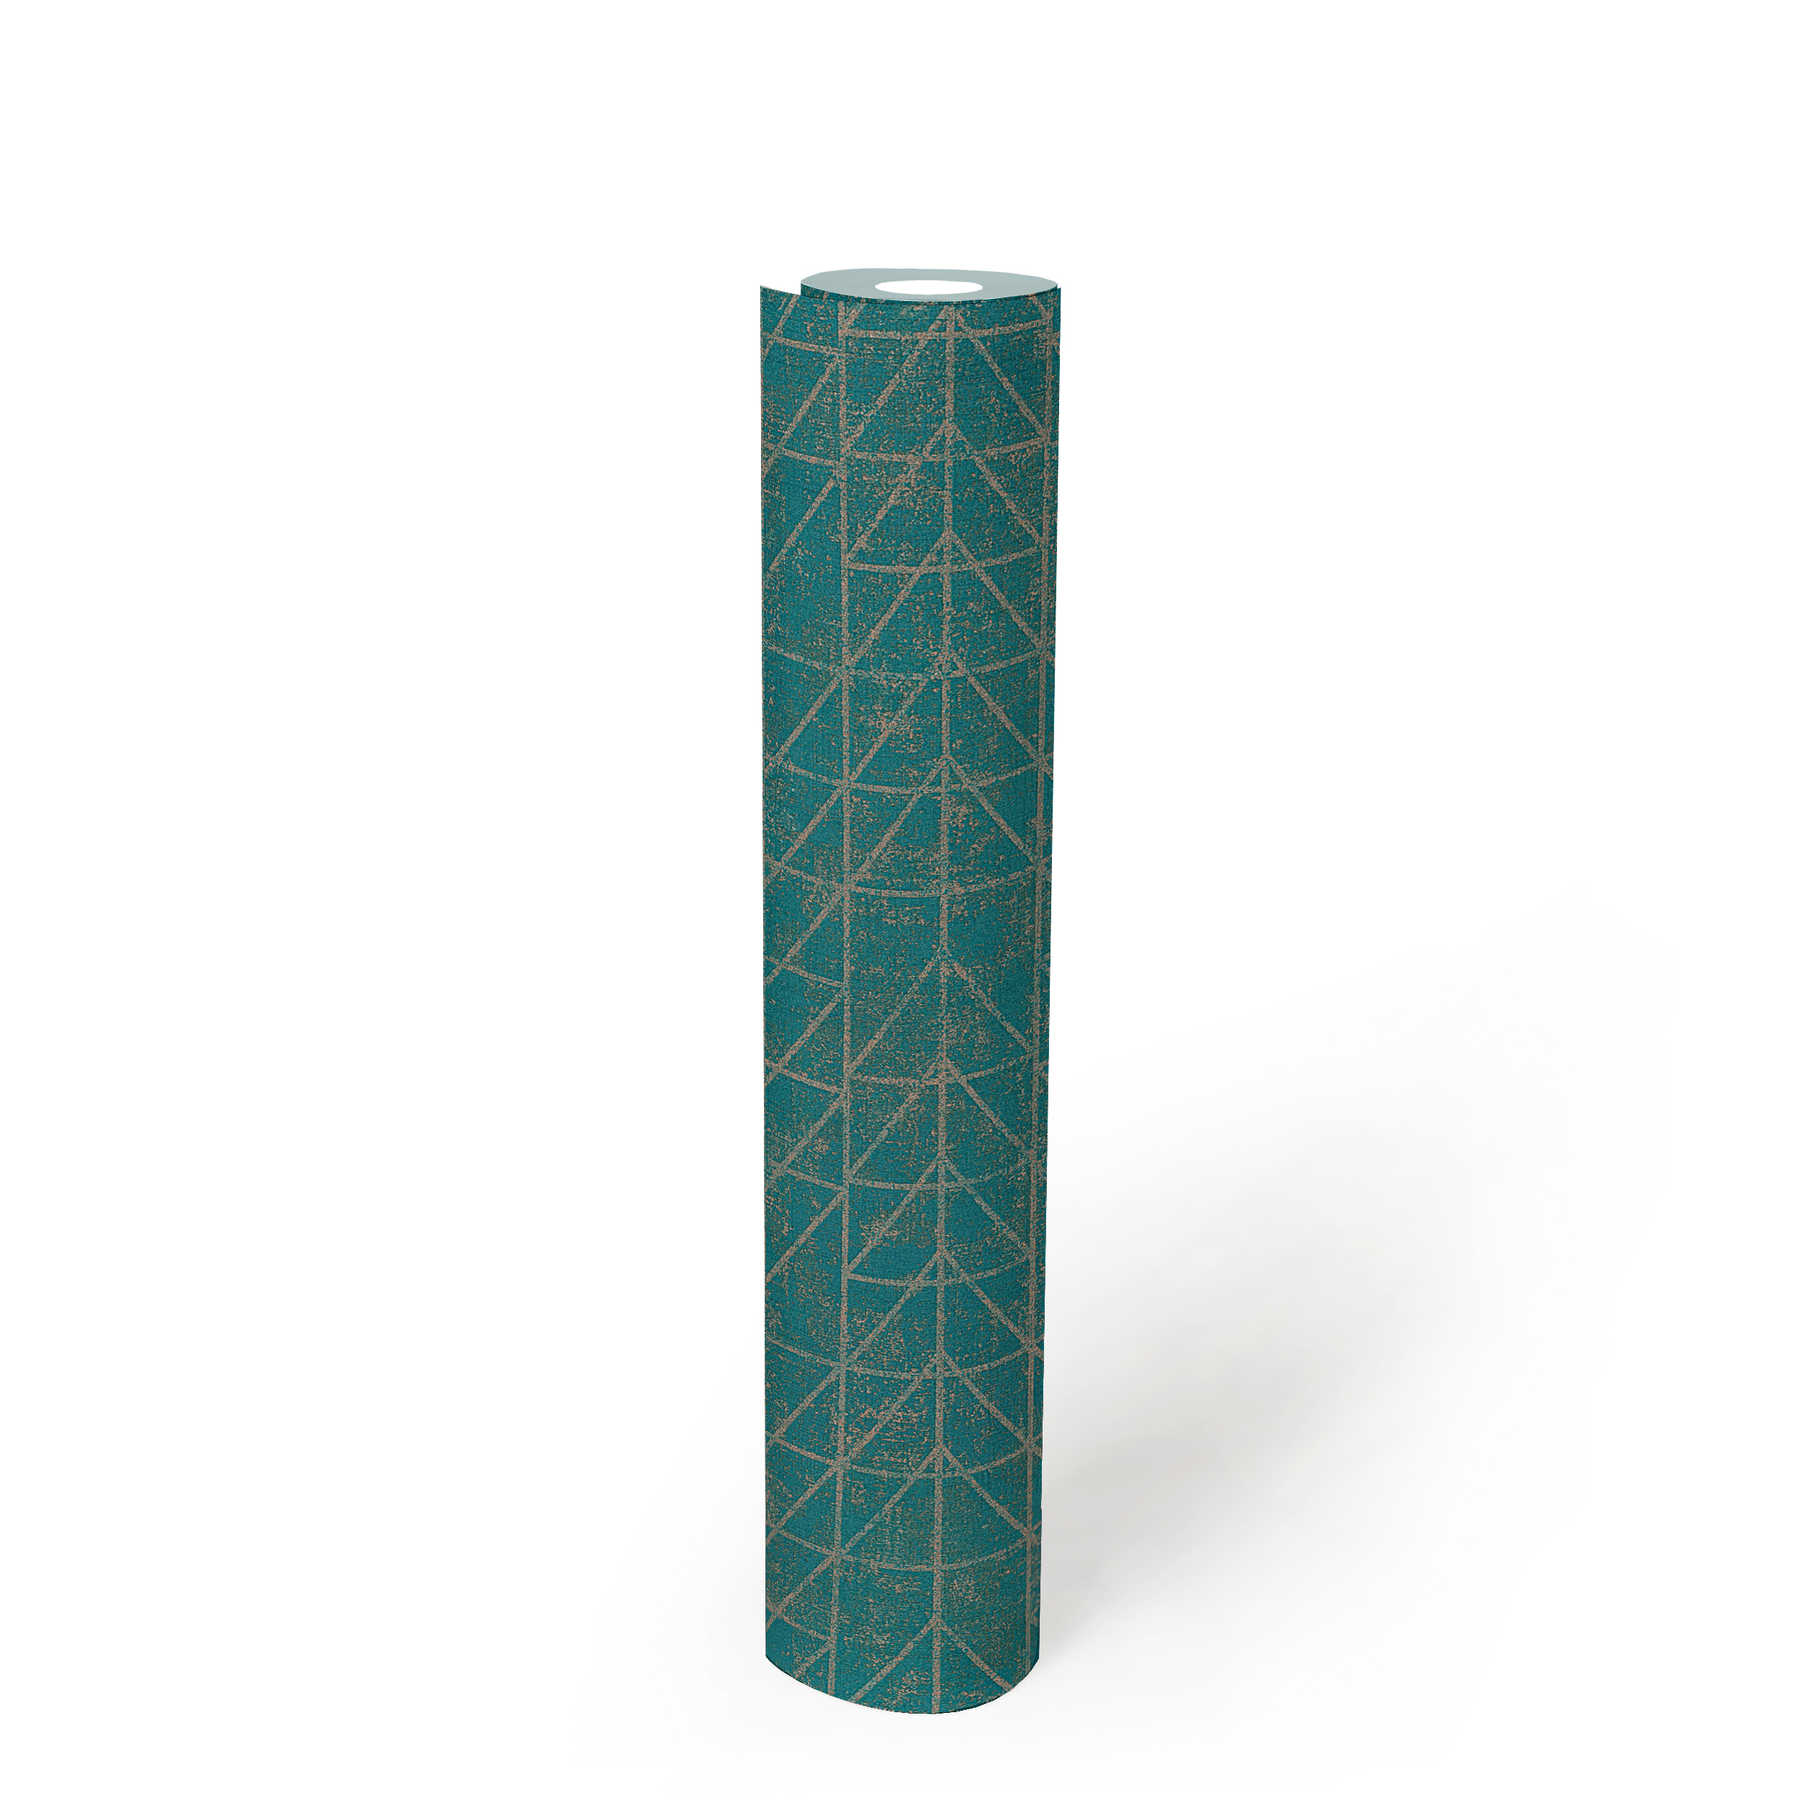             Turquoise ethnic wallpaper with Navajo pattern and metallic effect - blue, green, gold
        